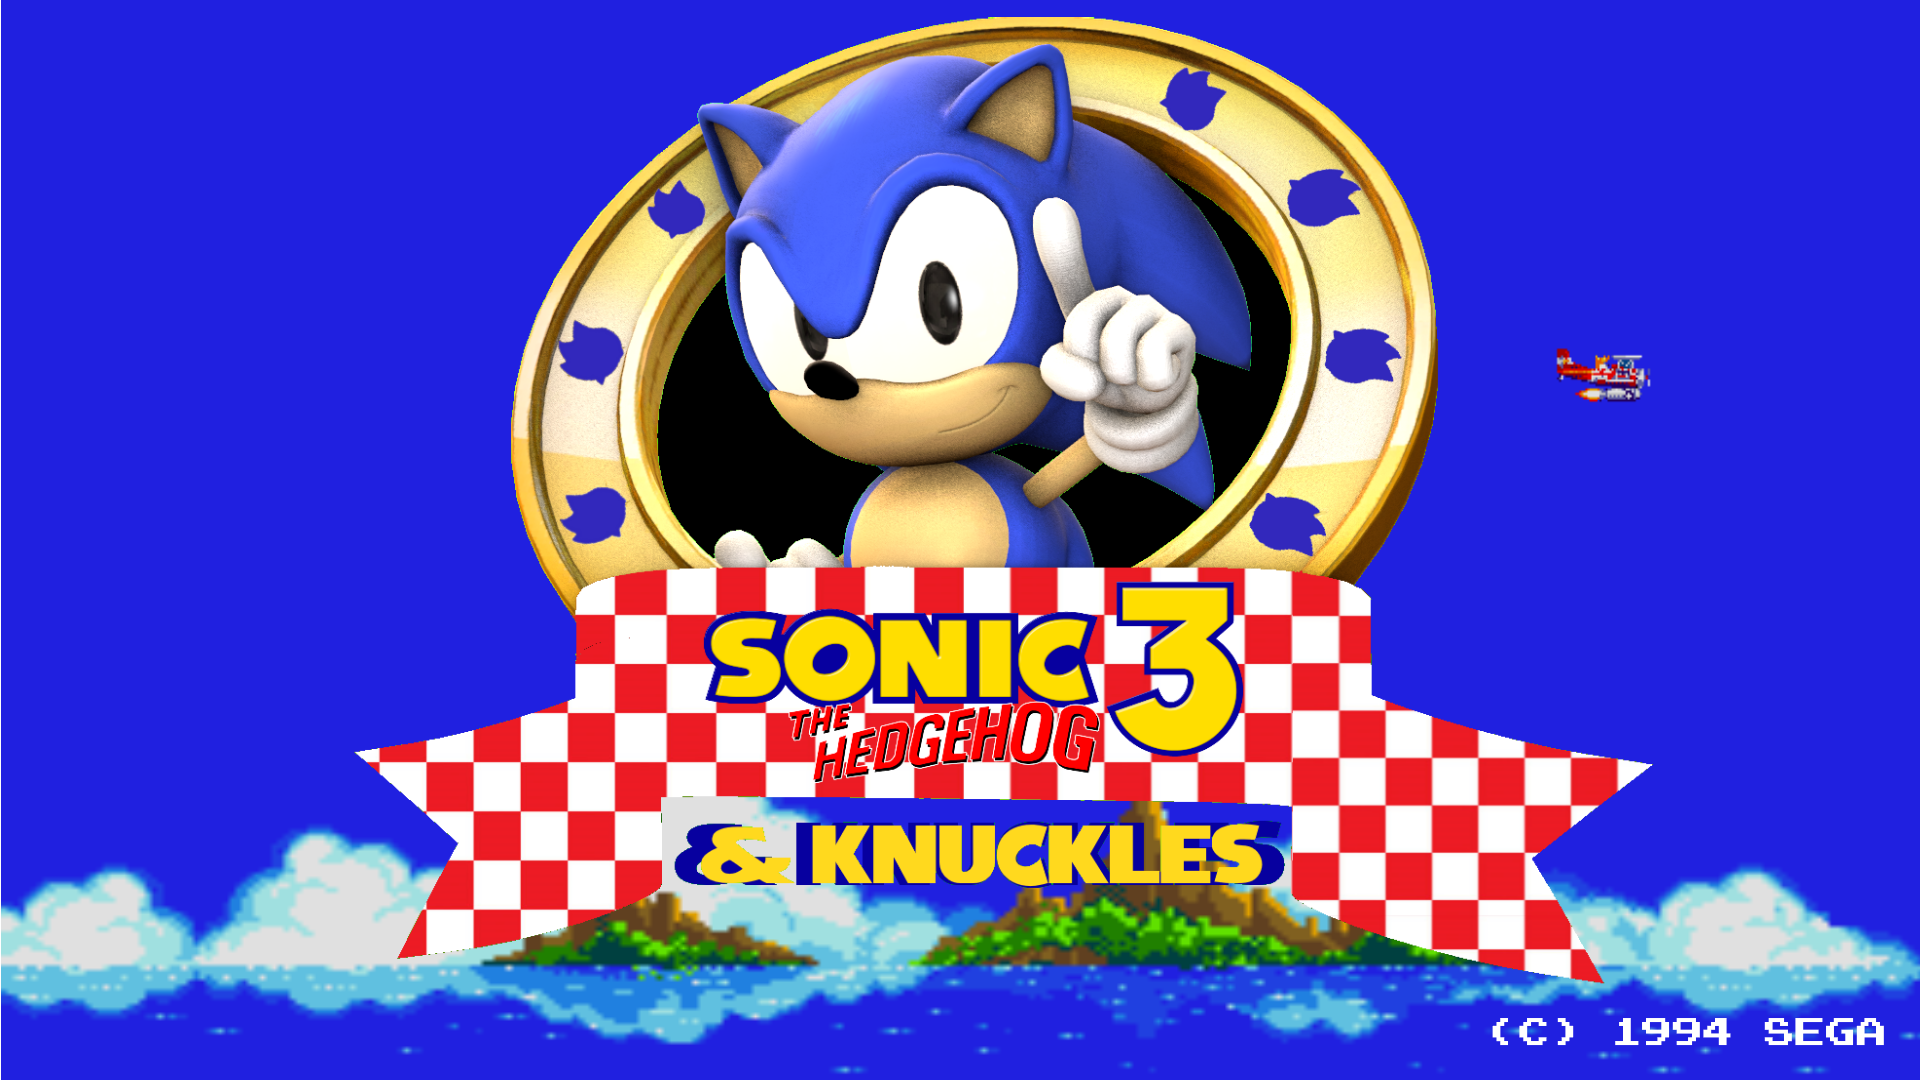 Sonic 3 air exe. Sonic 3 и НАКЛЗ. Sonic 3 & Knuckles Sega. Sonic the Hedgehog 3 and Knuckles. Sonic 3 and Knuckles русская версия Ром.